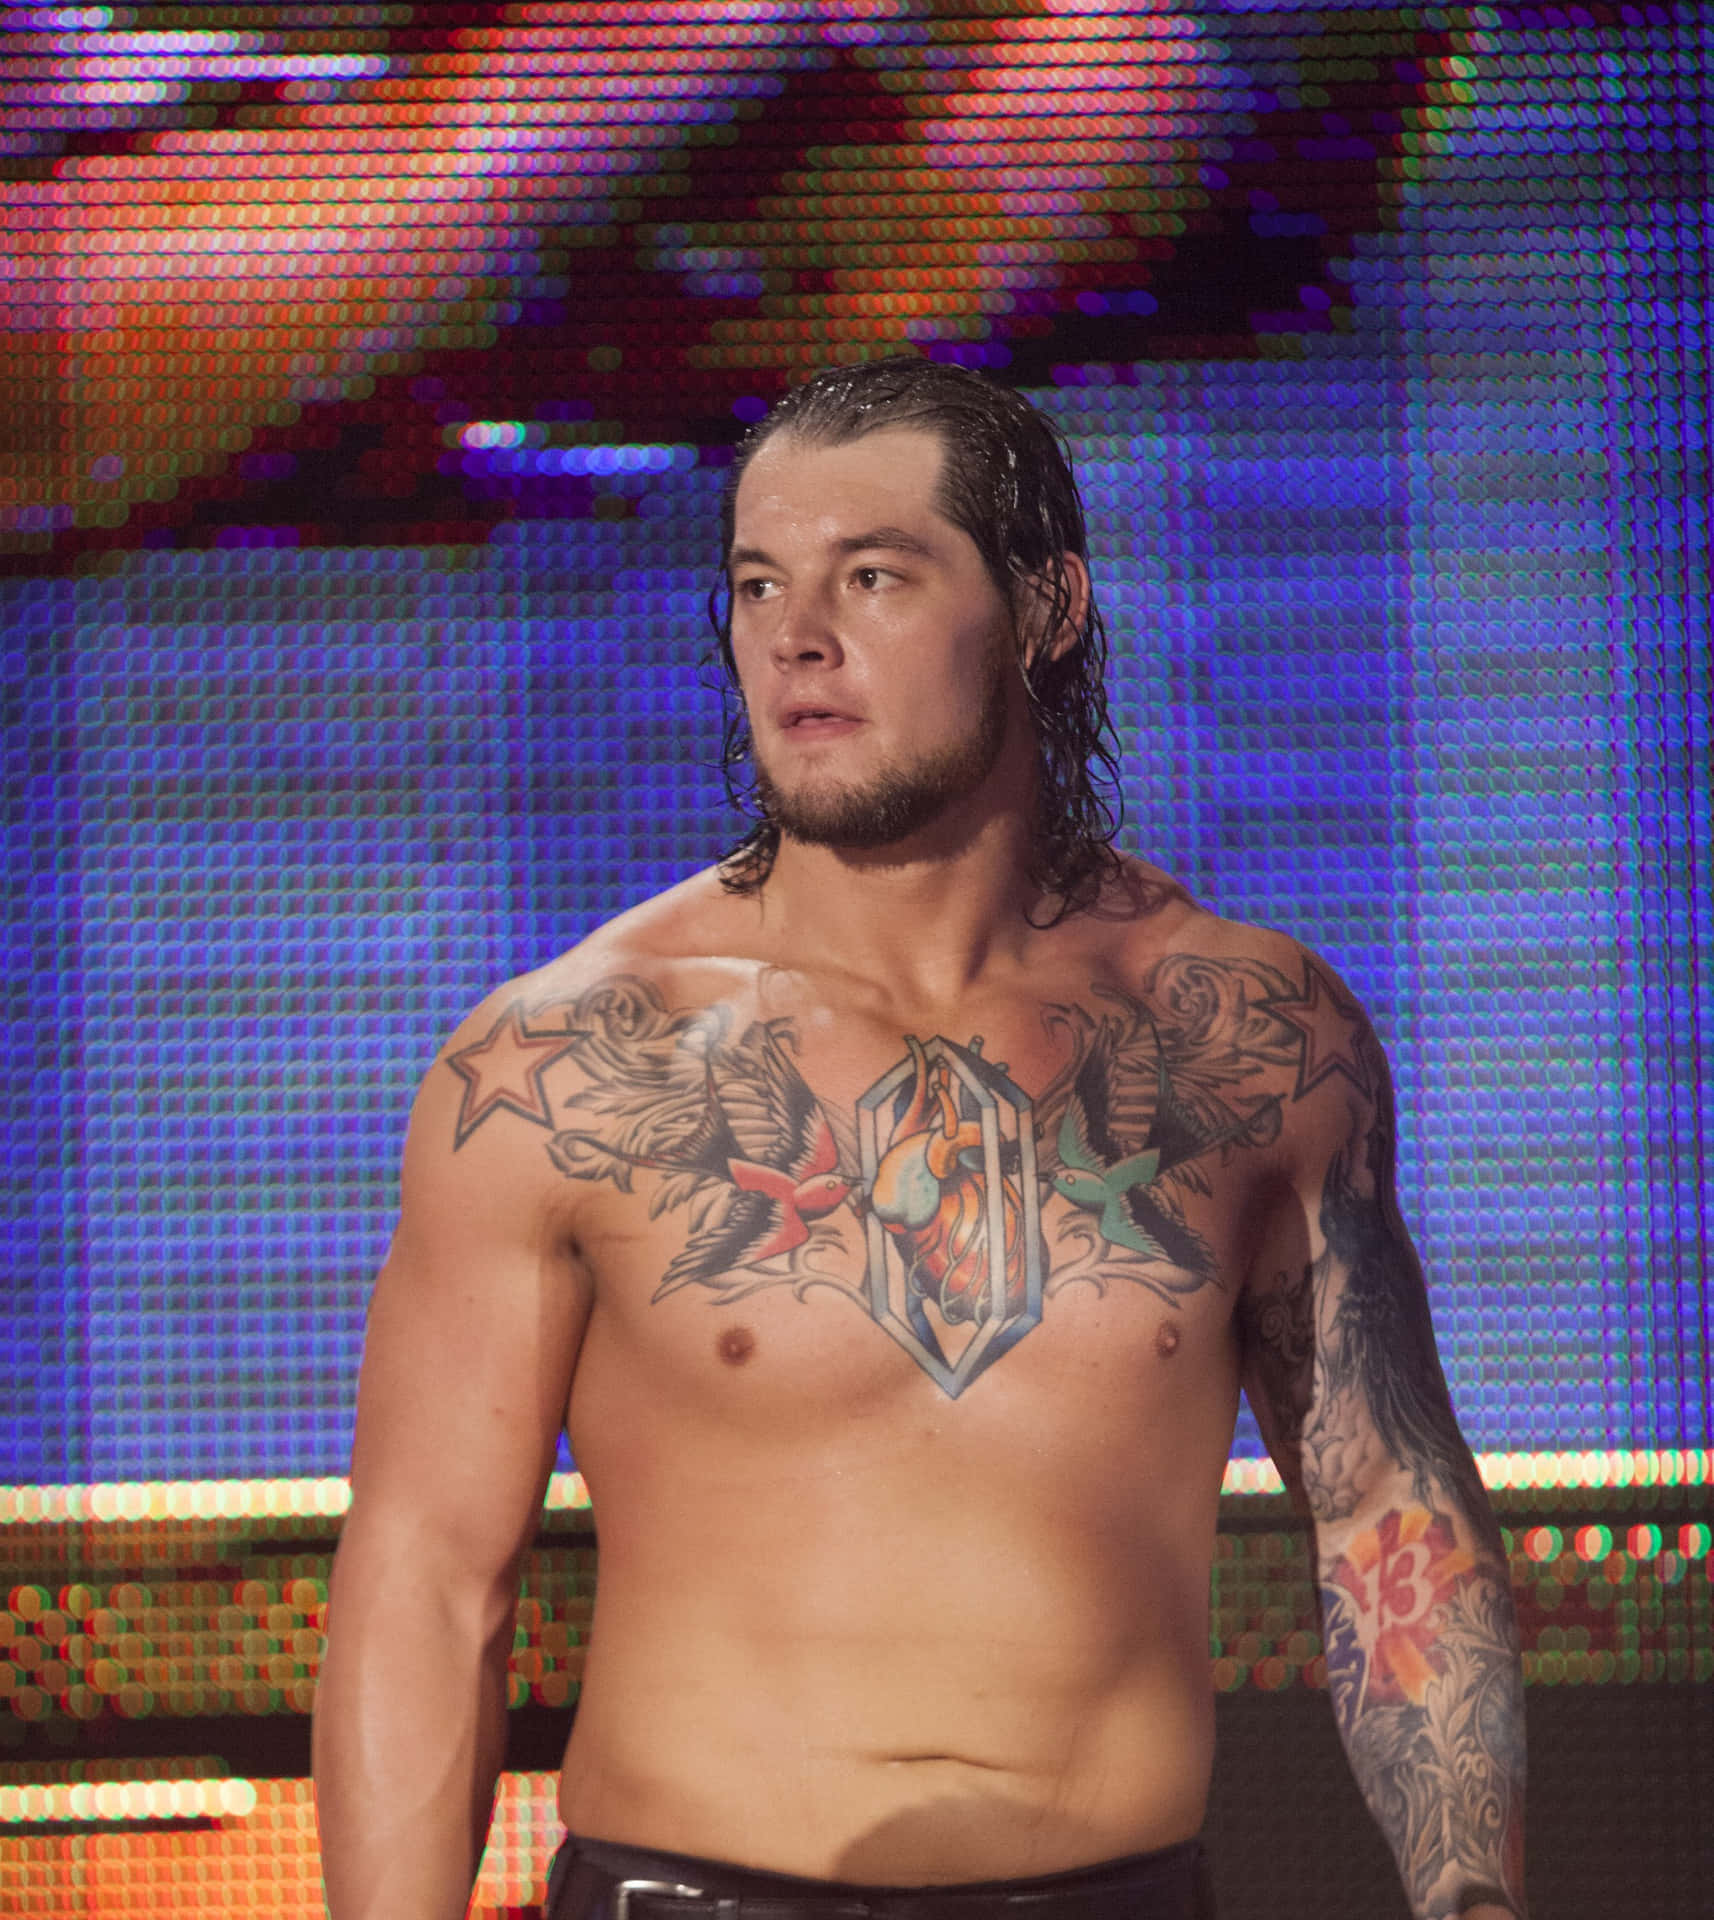 Brottarebaron Corbin Utan Tröja. (this Would Be A Strange Choice For A Computer Or Mobile Wallpaper, But If That's What You Want, There Ya Go!) Wallpaper